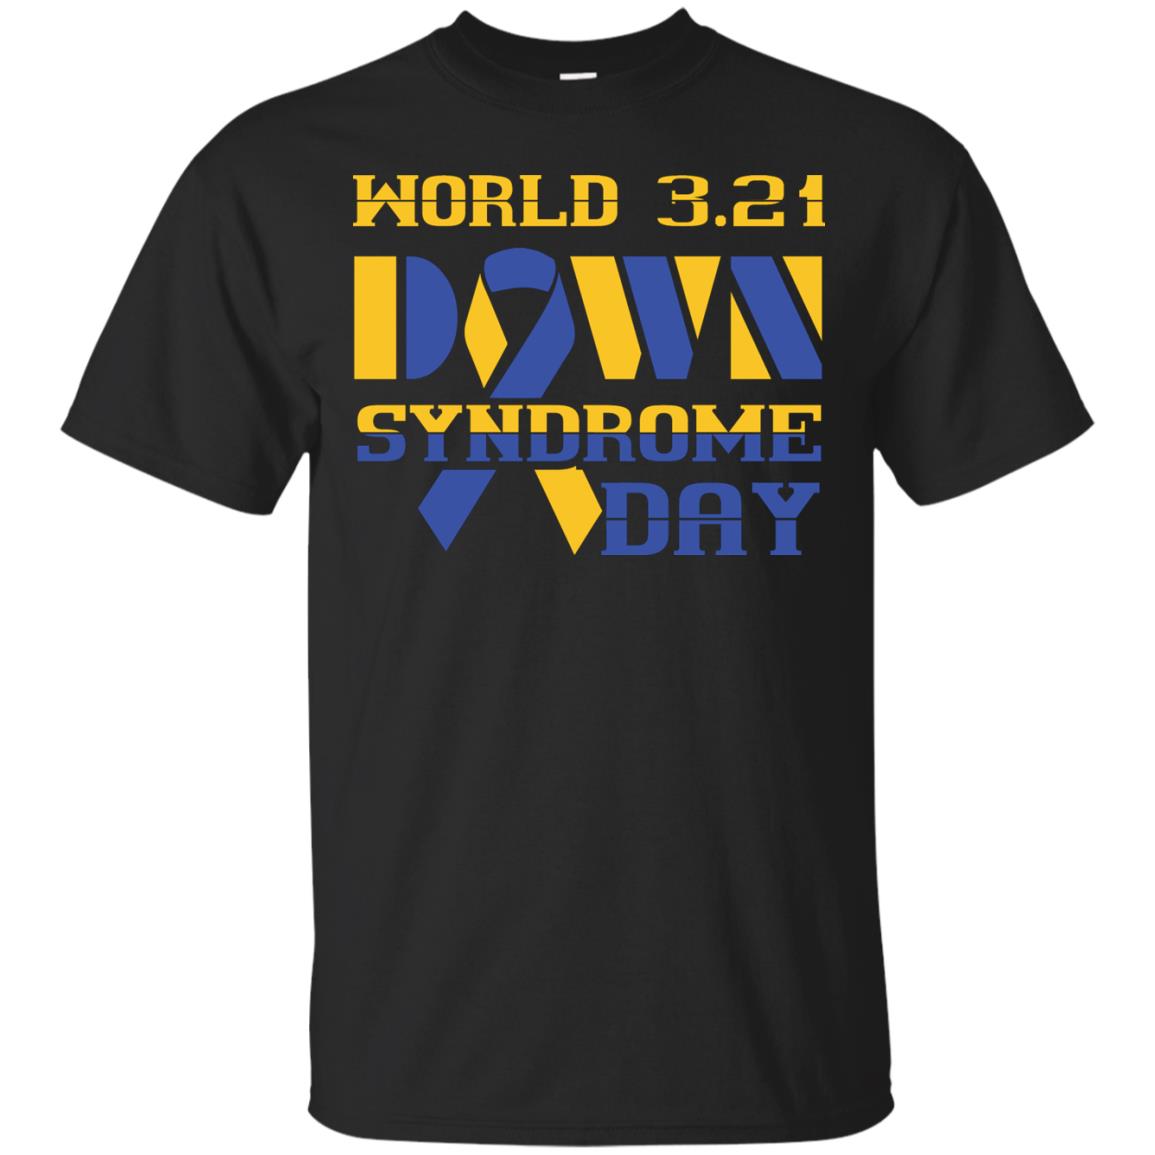 World 3.21 Down Syndrome Day Gift Shirt For Men Or Women